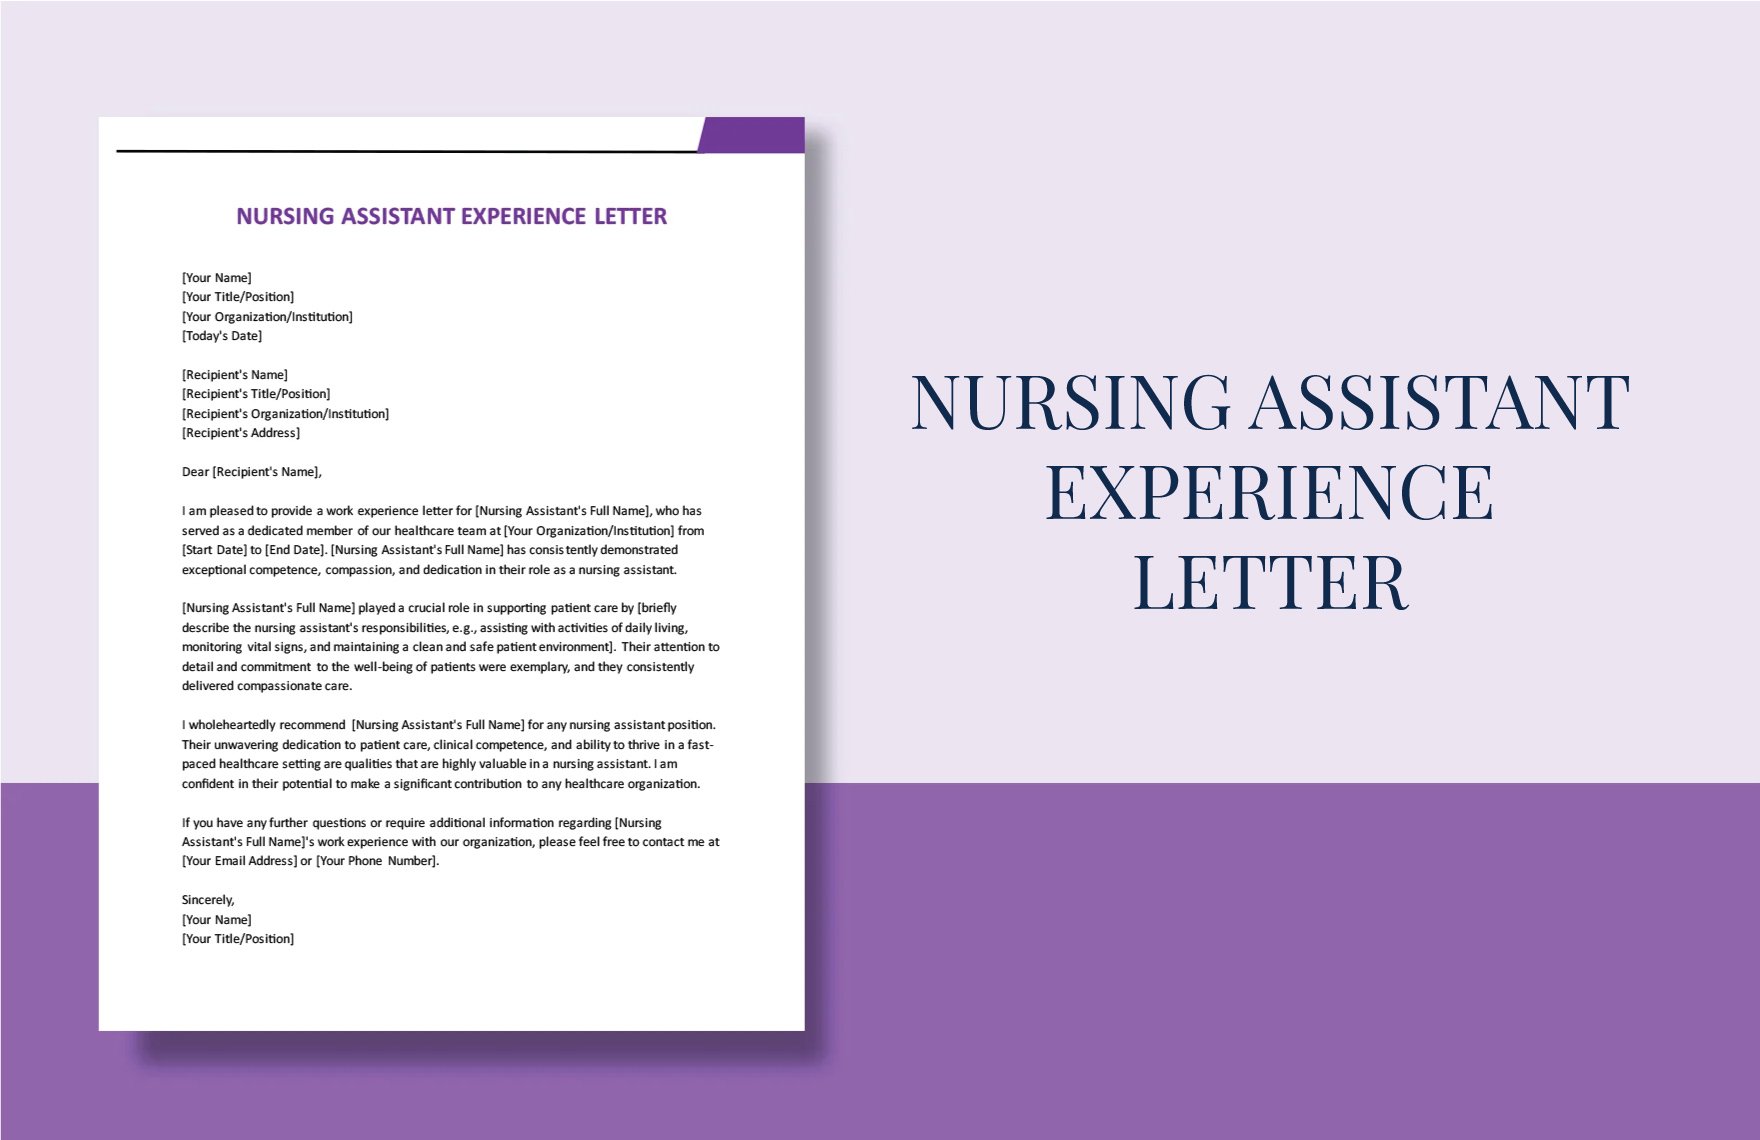 Nursing Assistant Experience Letter in Word, Google Docs, PDF